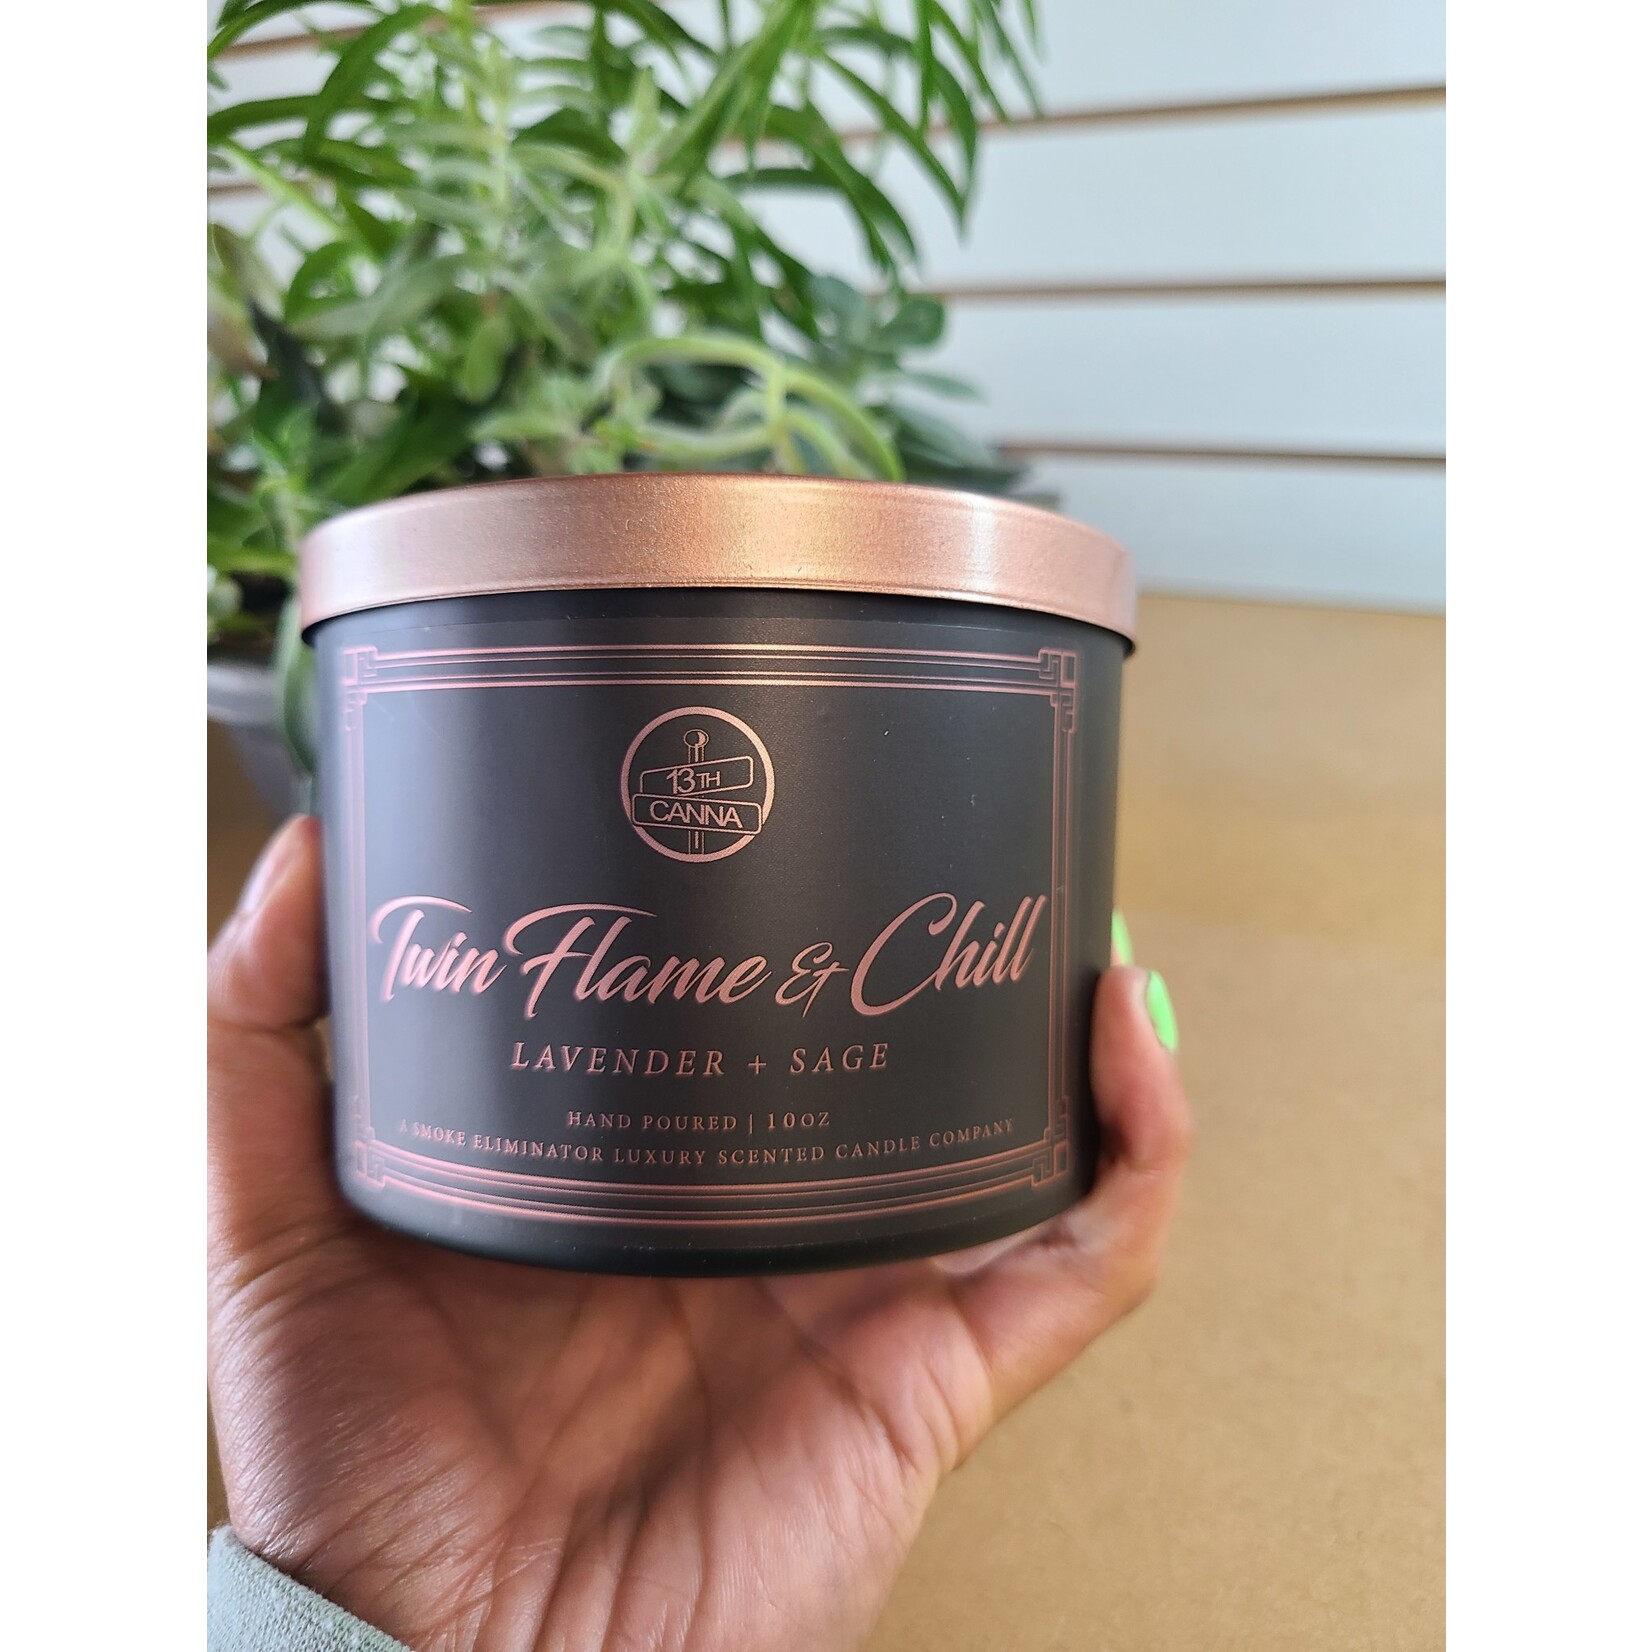 13th & Canna Twin Flame & Chill Candle 10 oz.